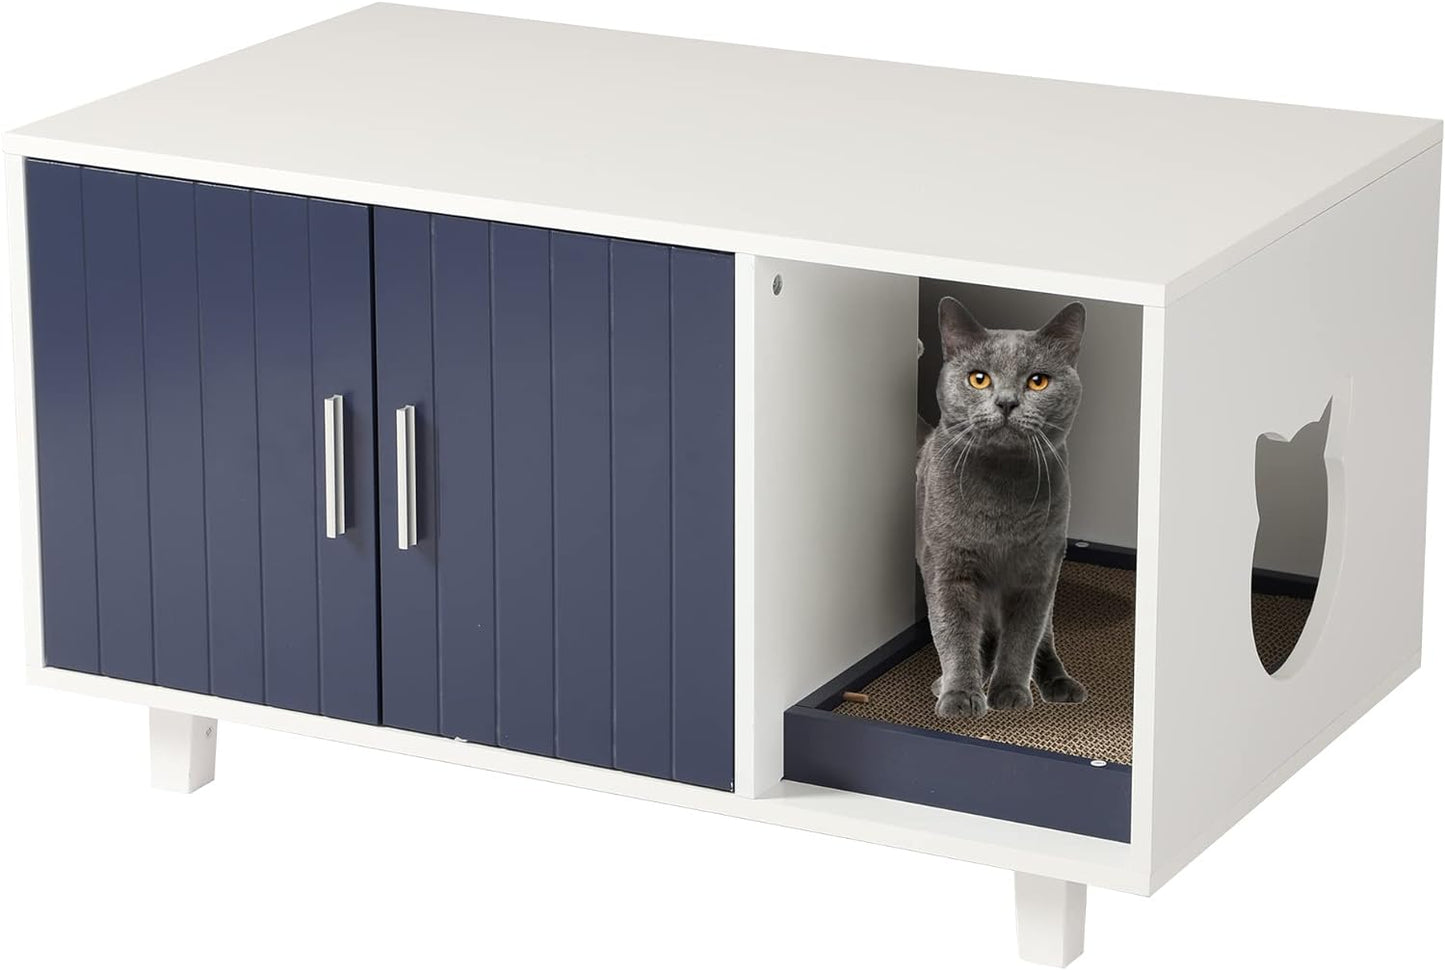 Cat Litter Box Enclosure Hidden Cat Washroom Furniture Bench with Cat Scratch Pad, Wooden Decorative Cat House End Table Nightstand, Hide Odor& Pet Poop,White Blue